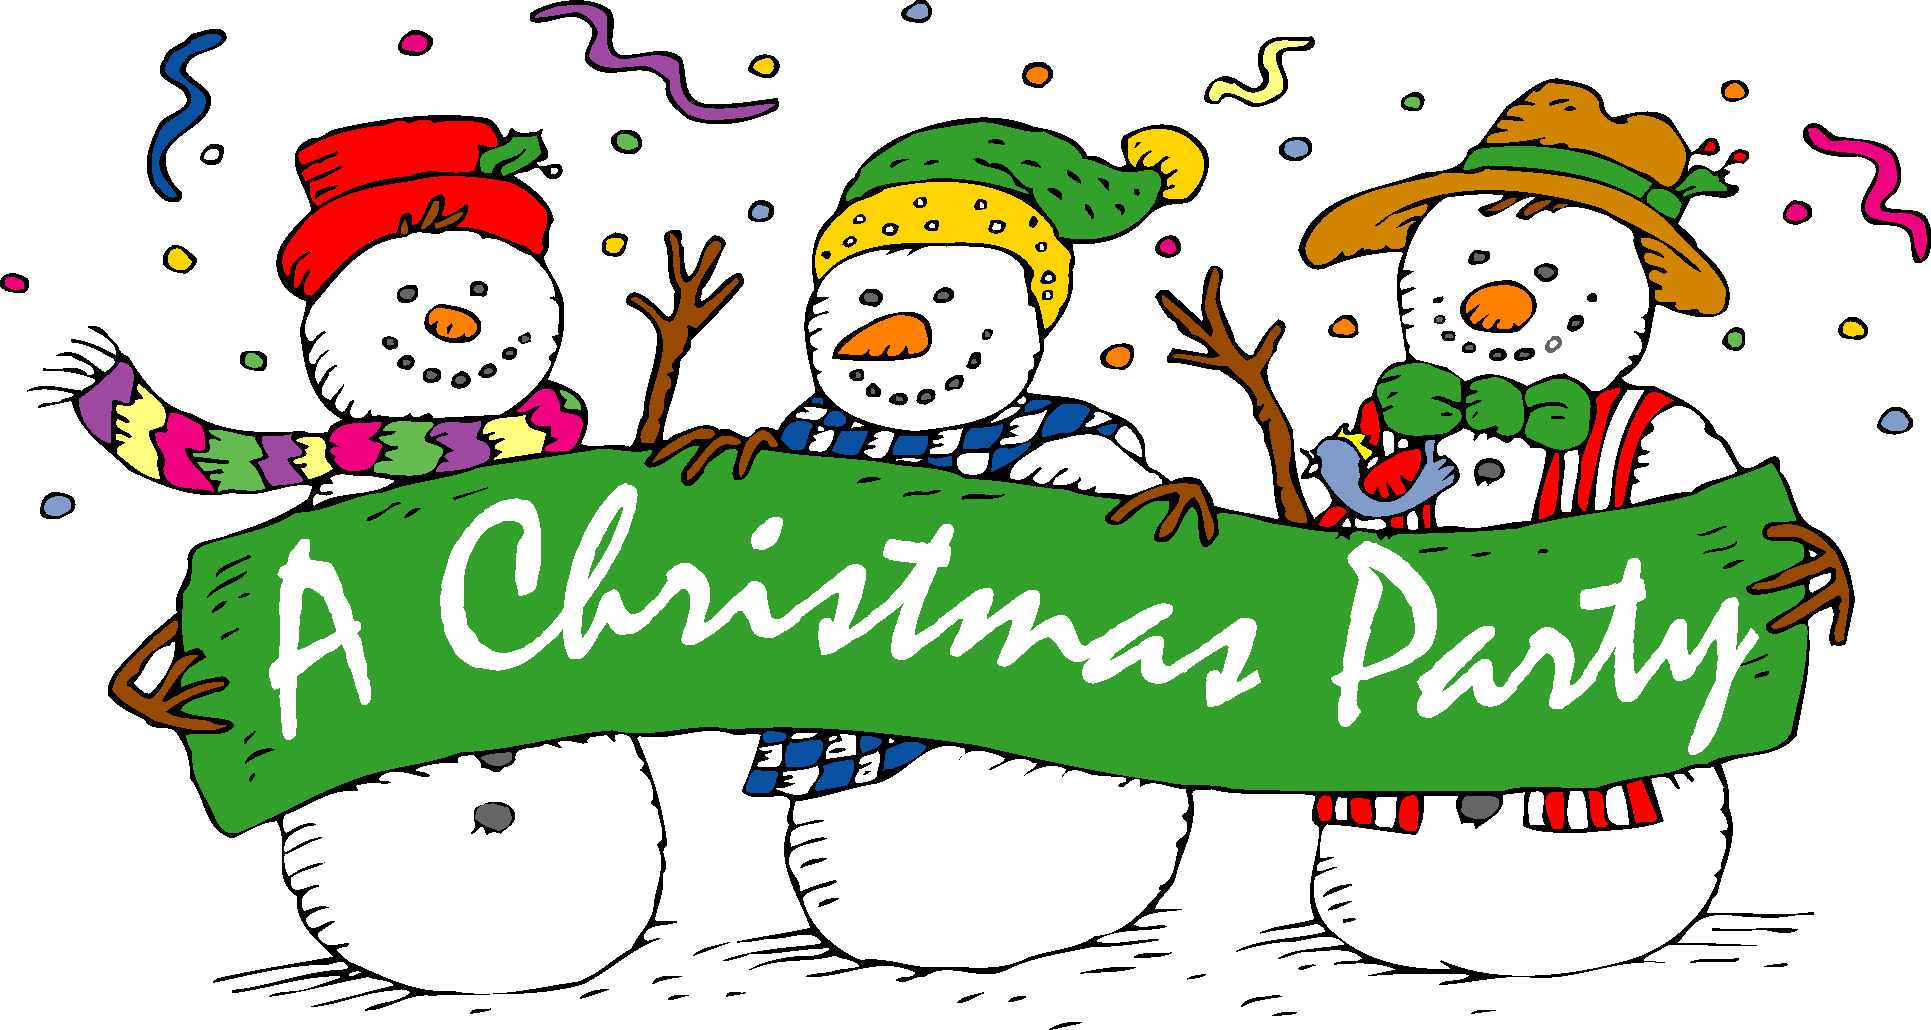 Christmas party images clip art.